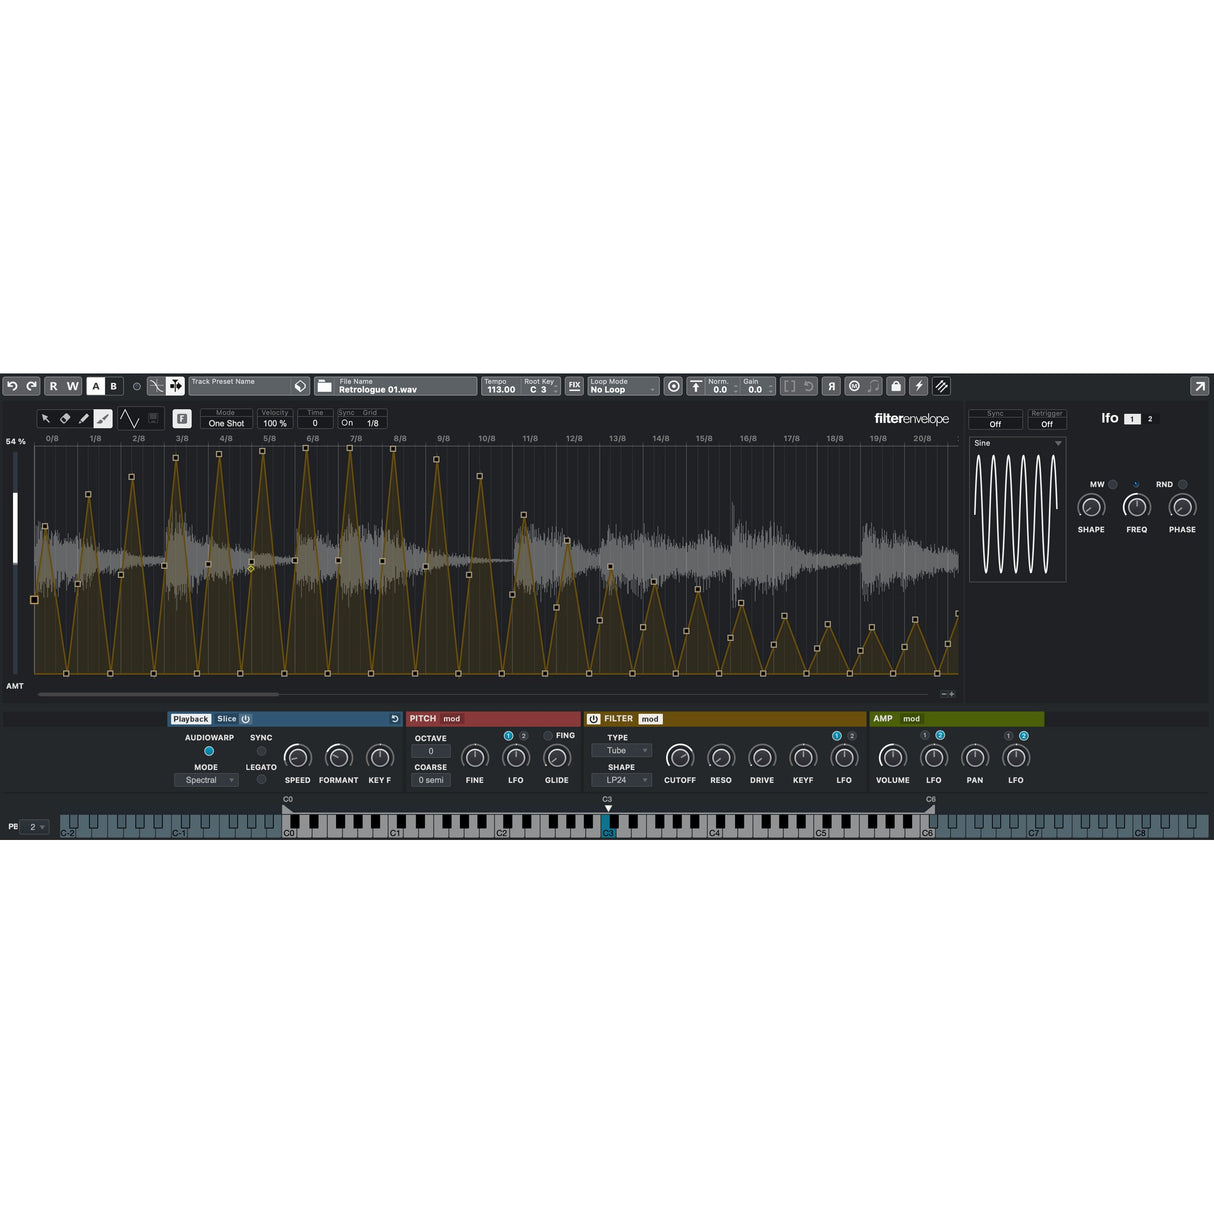 Steinberg Cubase Pro 13 Audio Post-Production Software, Education, Multi License Download